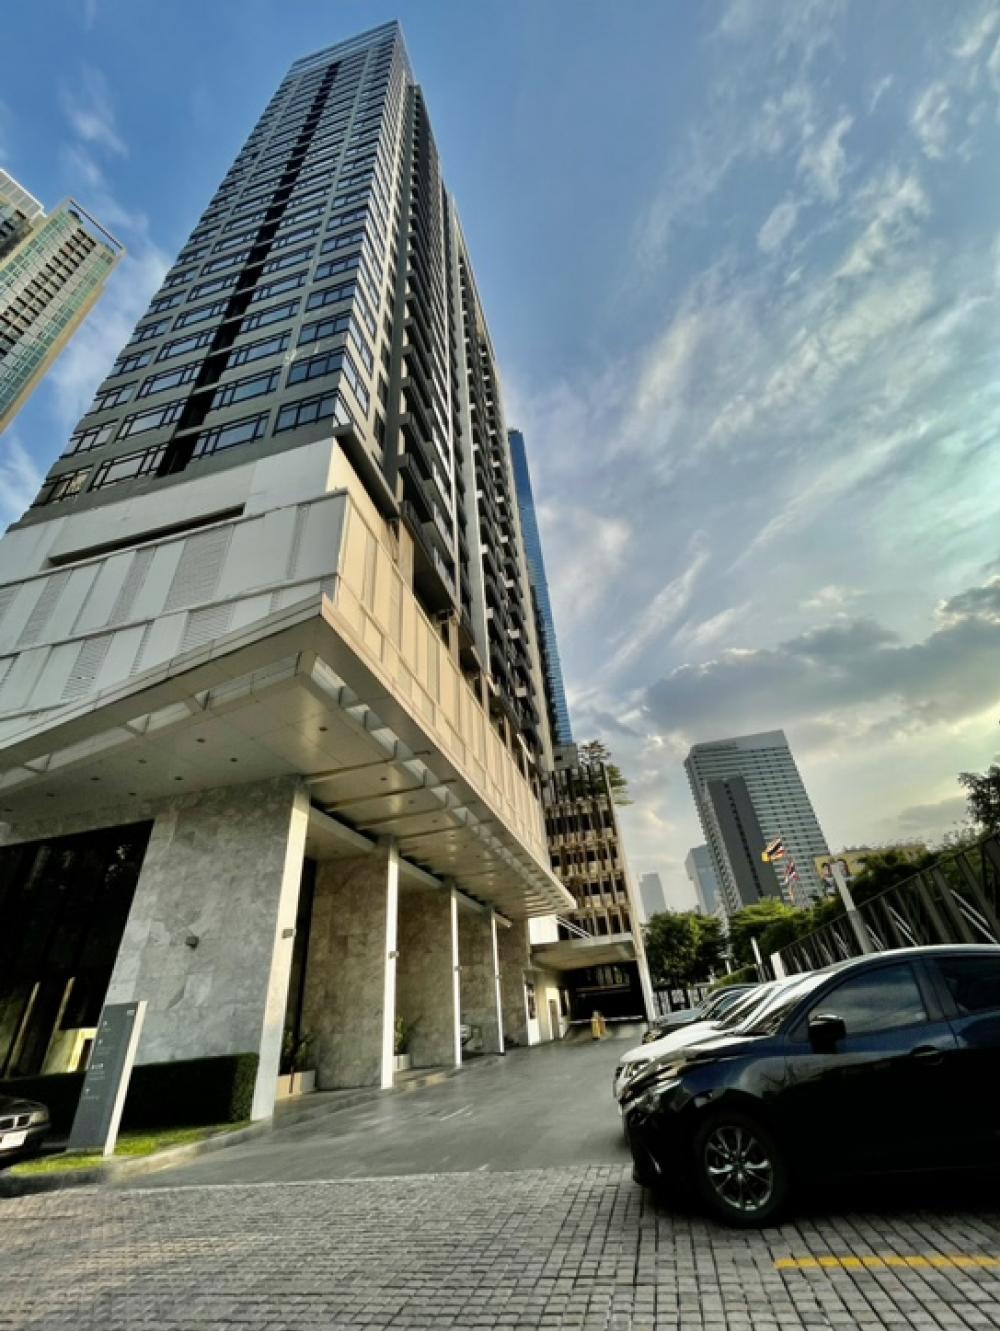 For SaleCondoRatchadapisek, Huaikwang, Suttisan : Ivy Ampio Condo, good location, next to Ratchadaphisek Road, only 200 meters from MRT Cultural Center.